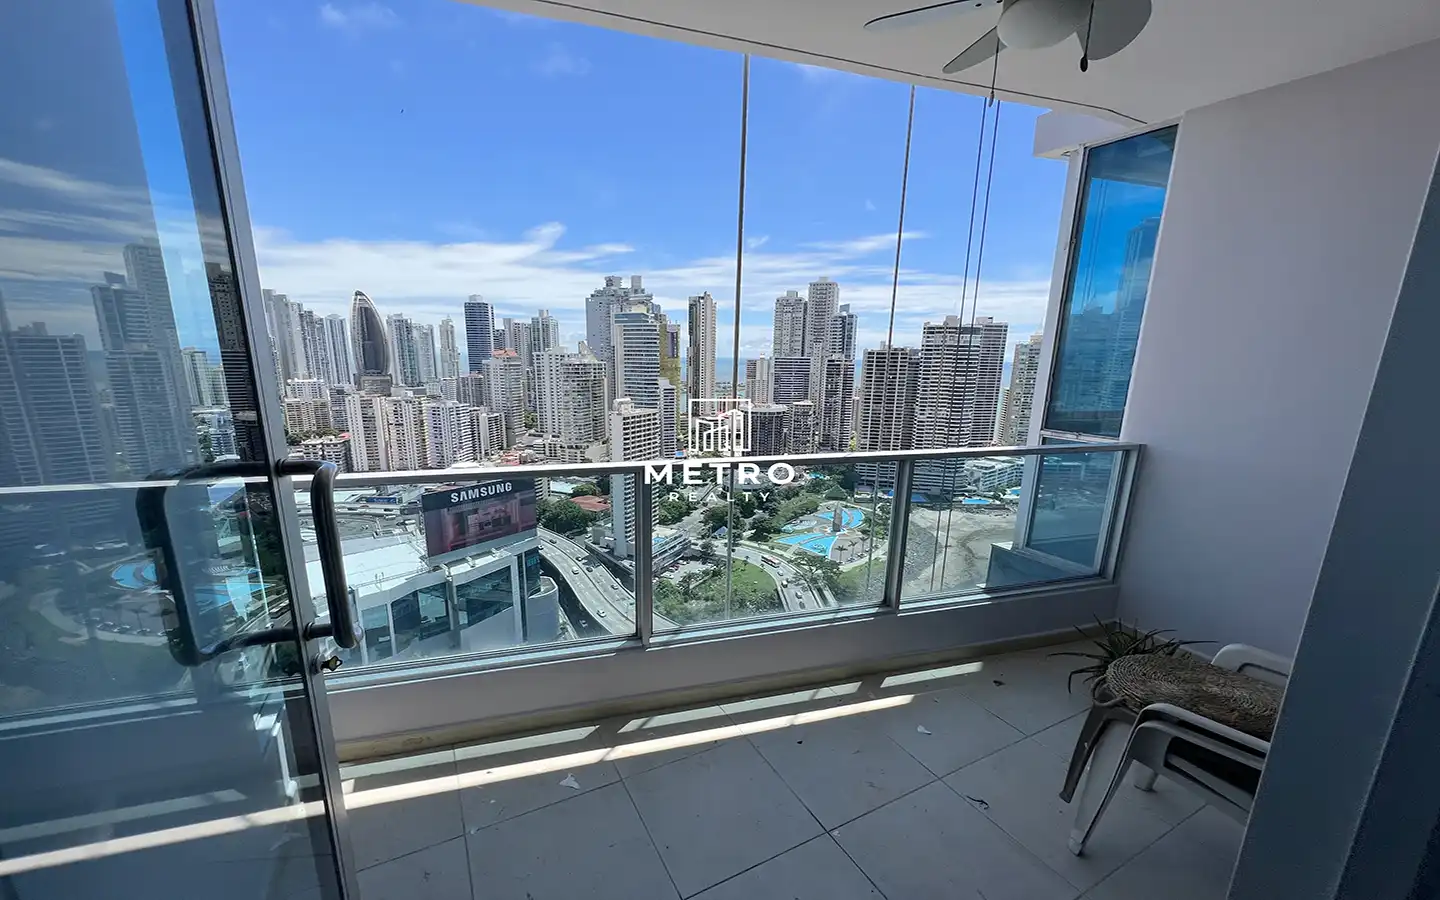 Grand Bay Tower Cinta Costera Panama Apartment for Sale balcony view